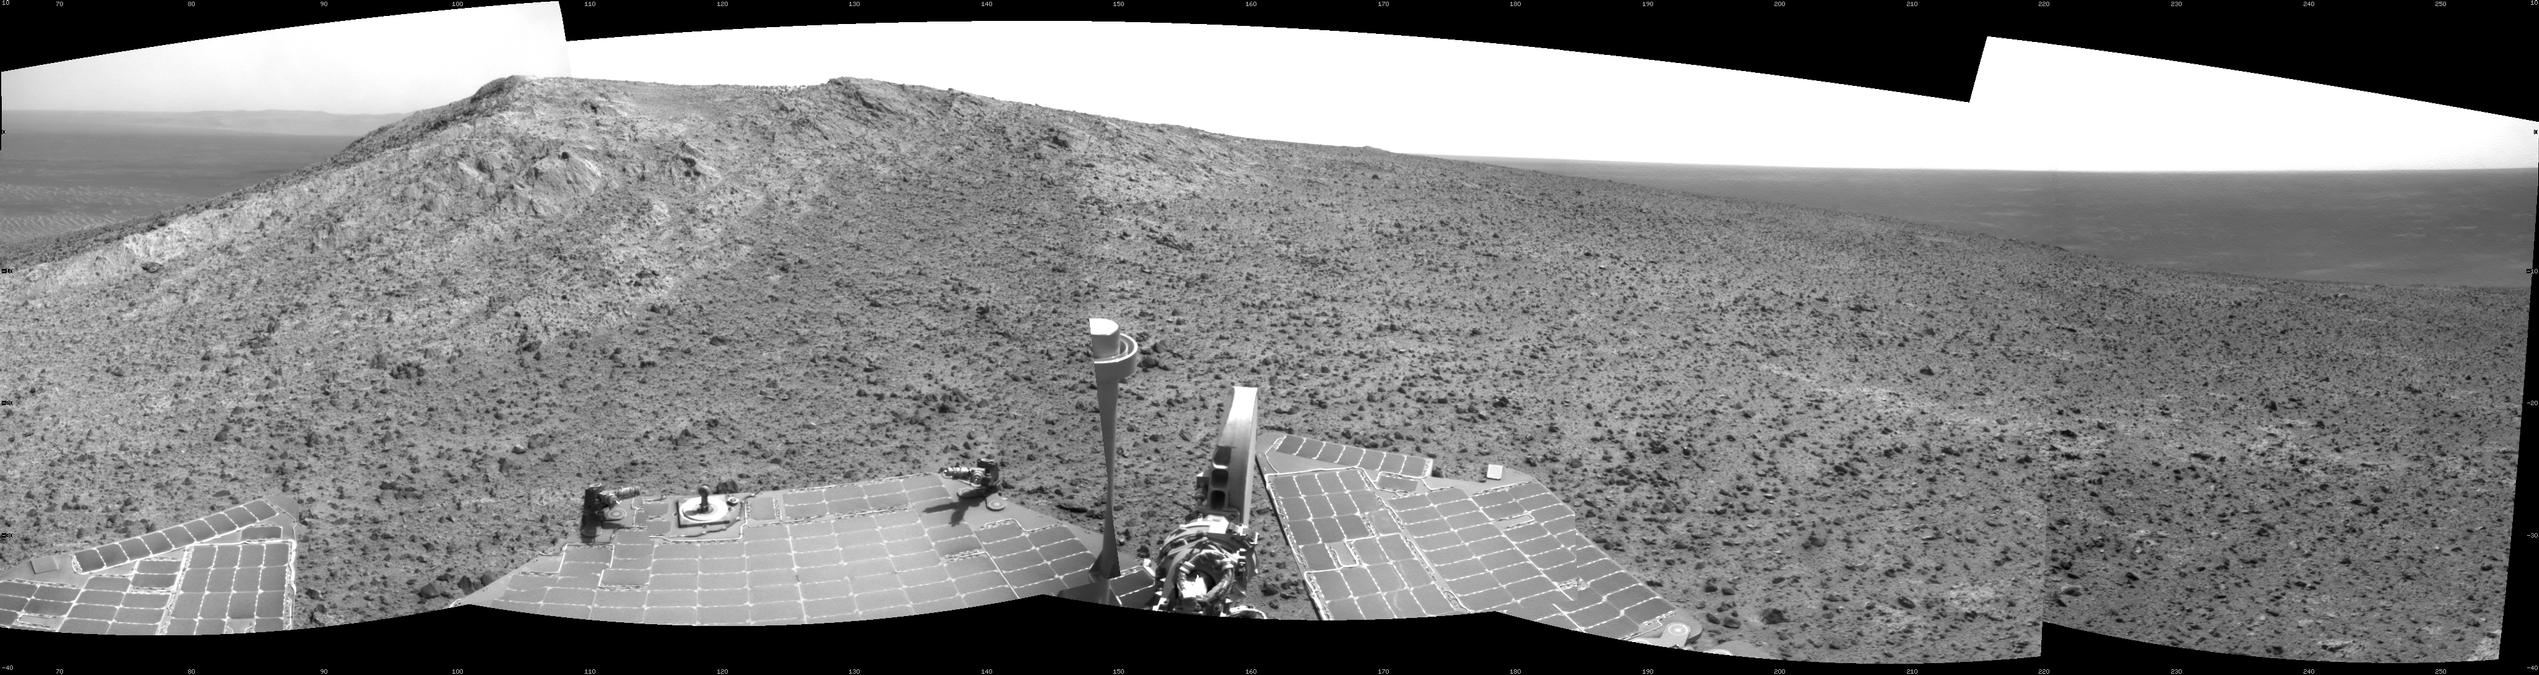 NASA's Mars Exploration Rover Opportunity recorded this view of the summit of "Cape Tribulation," on the western rim of Endeavour Crater on the day before the rover drove to the top. This crest is about 440 feet higher in elevation than the plain surrounding the crater.